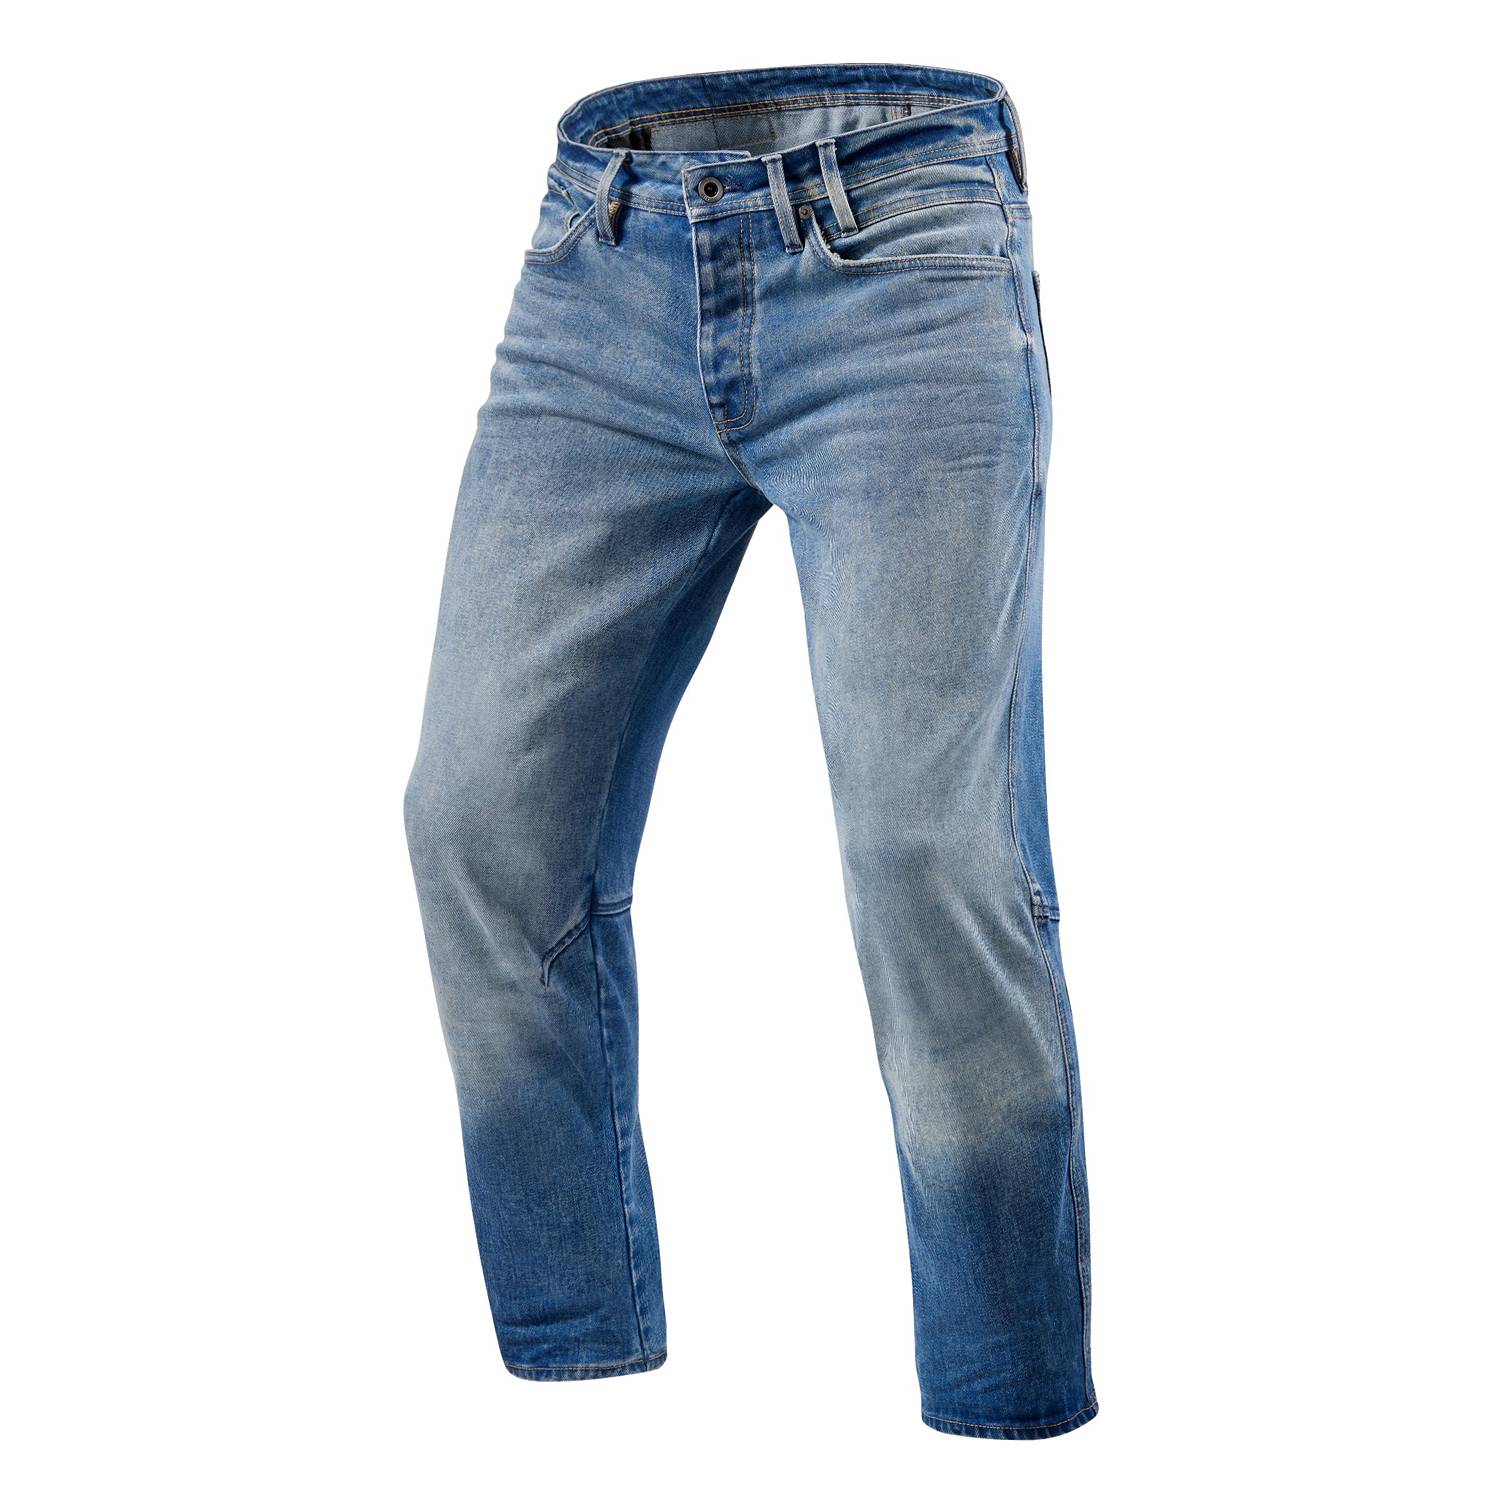 Image of REV'IT! Salt TF Mid Blue Used Motorcycle Jeans Size L36/W30 ID 8700001339223